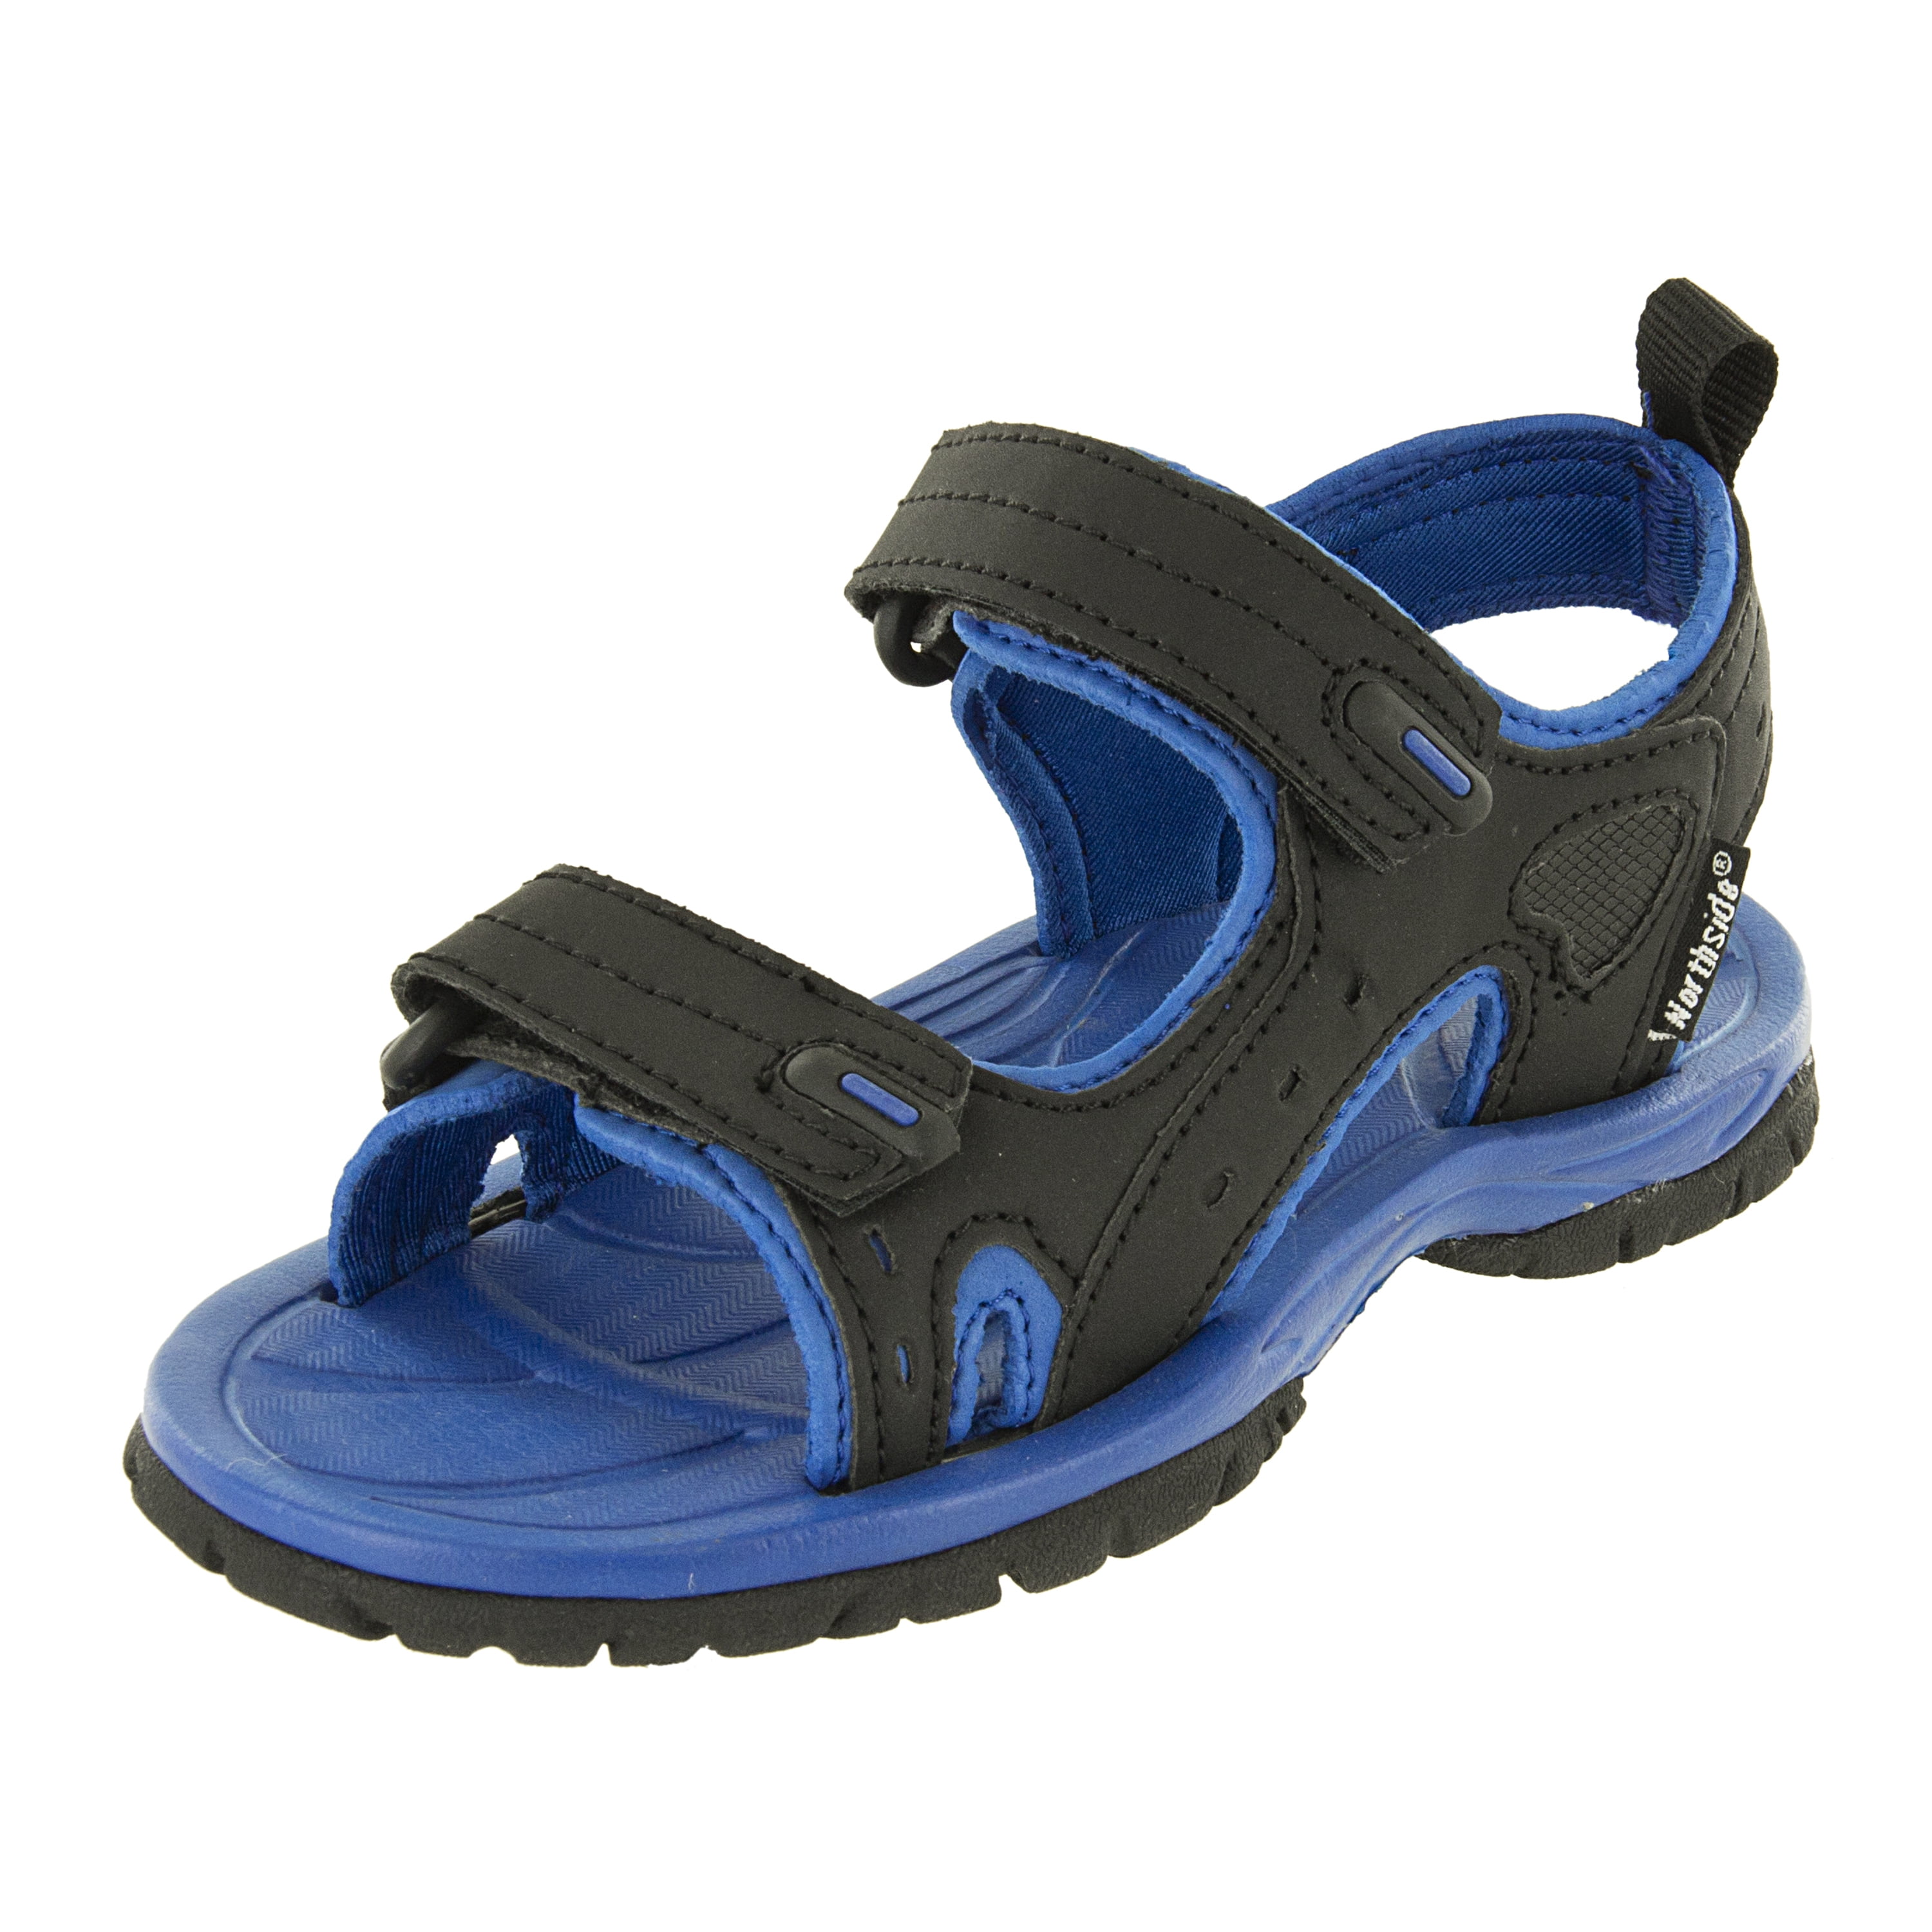 NORTY Boys /& Girls Toddler Little /& Big Kid Athletic Outdoor Sport Water Hiking Sandals